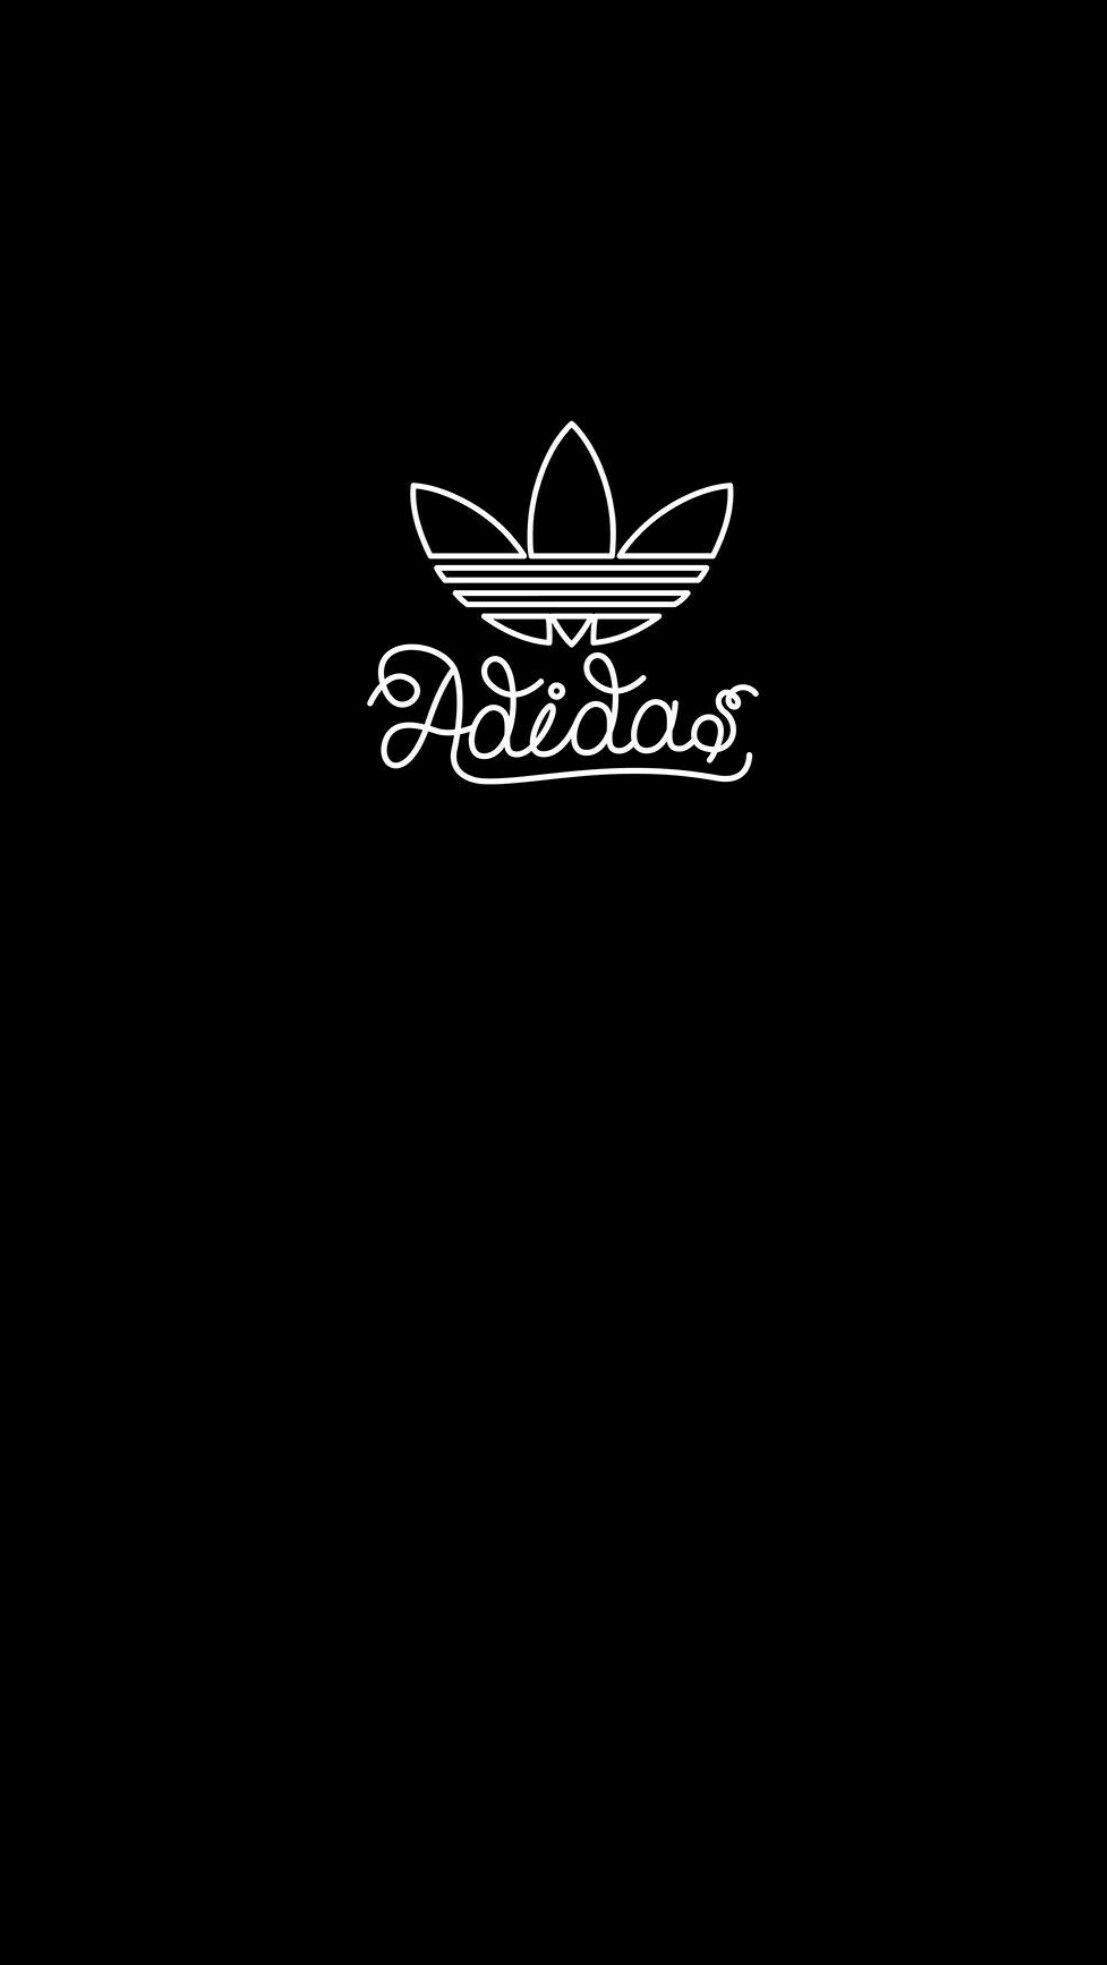 adidas #camouflage #wallpaper #iPhone #android. アディダス壁紙